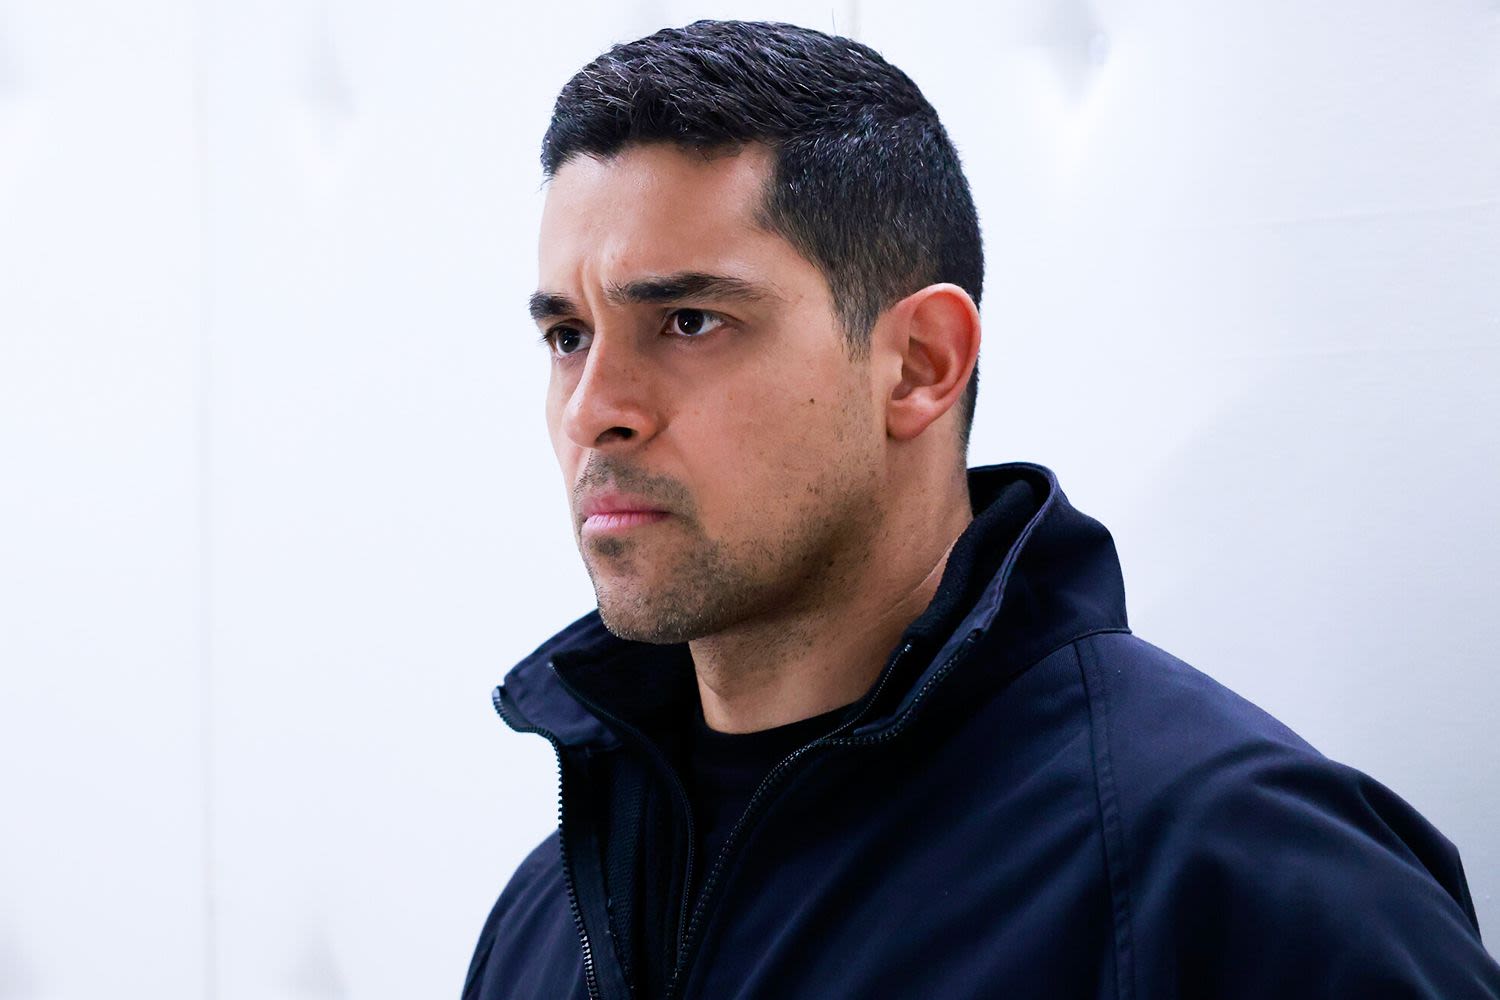 Wilmer Valderrama Details the Gruesome Way He’d Want His “NCIS” Character to Die: ‘Like Denzel Washington in “Training Day”’